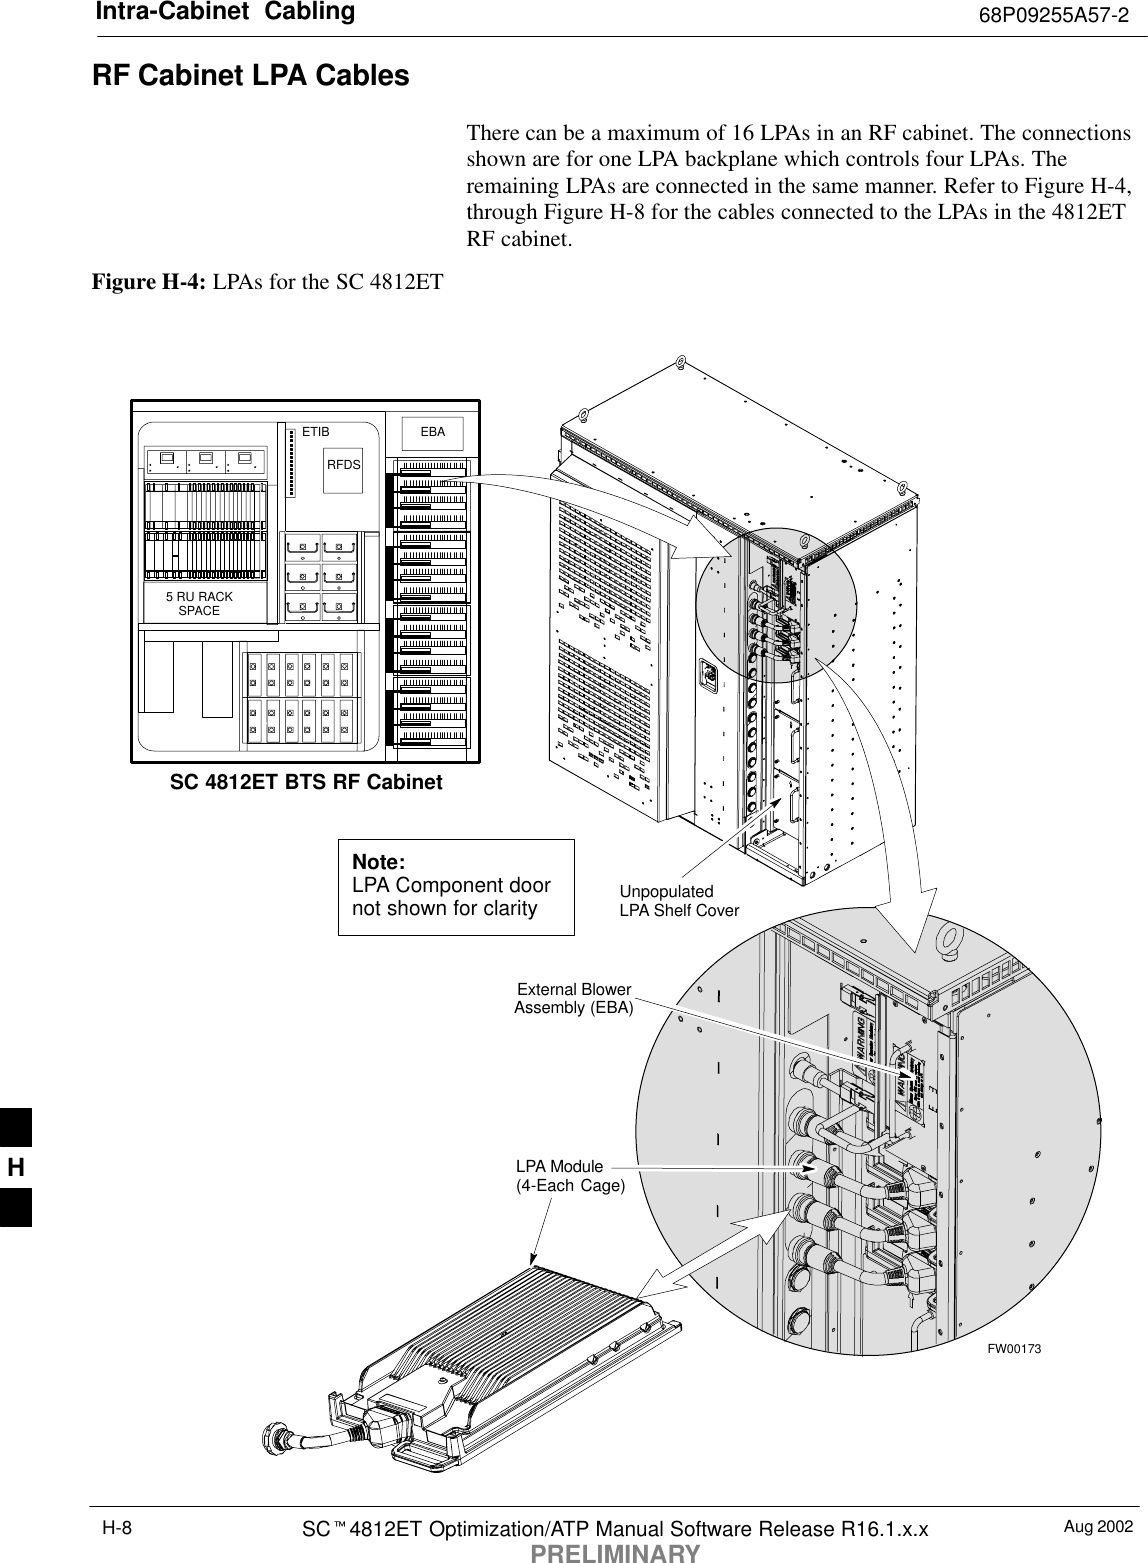 Intra-Cabinet  Cabling 68P09255A57-2Aug 2002SC4812ET Optimization/ATP Manual Software Release R16.1.x.xPRELIMINARYH-8RF Cabinet LPA Cables There can be a maximum of 16 LPAs in an RF cabinet. The connectionsshown are for one LPA backplane which controls four LPAs. Theremaining LPAs are connected in the same manner. Refer to Figure H-4,through Figure H-8 for the cables connected to the LPAs in the 4812ETRF cabinet.Figure H-4: LPAs for the SC 4812ET5 RU RACKSPACERFDSEBAETIBUnpopulatedLPA Shelf CoverLPA Module(4-Each Cage)External BlowerAssembly (EBA)Note:LPA Component doornot shown for claritySC 4812ET BTS RF CabinetFW00173H